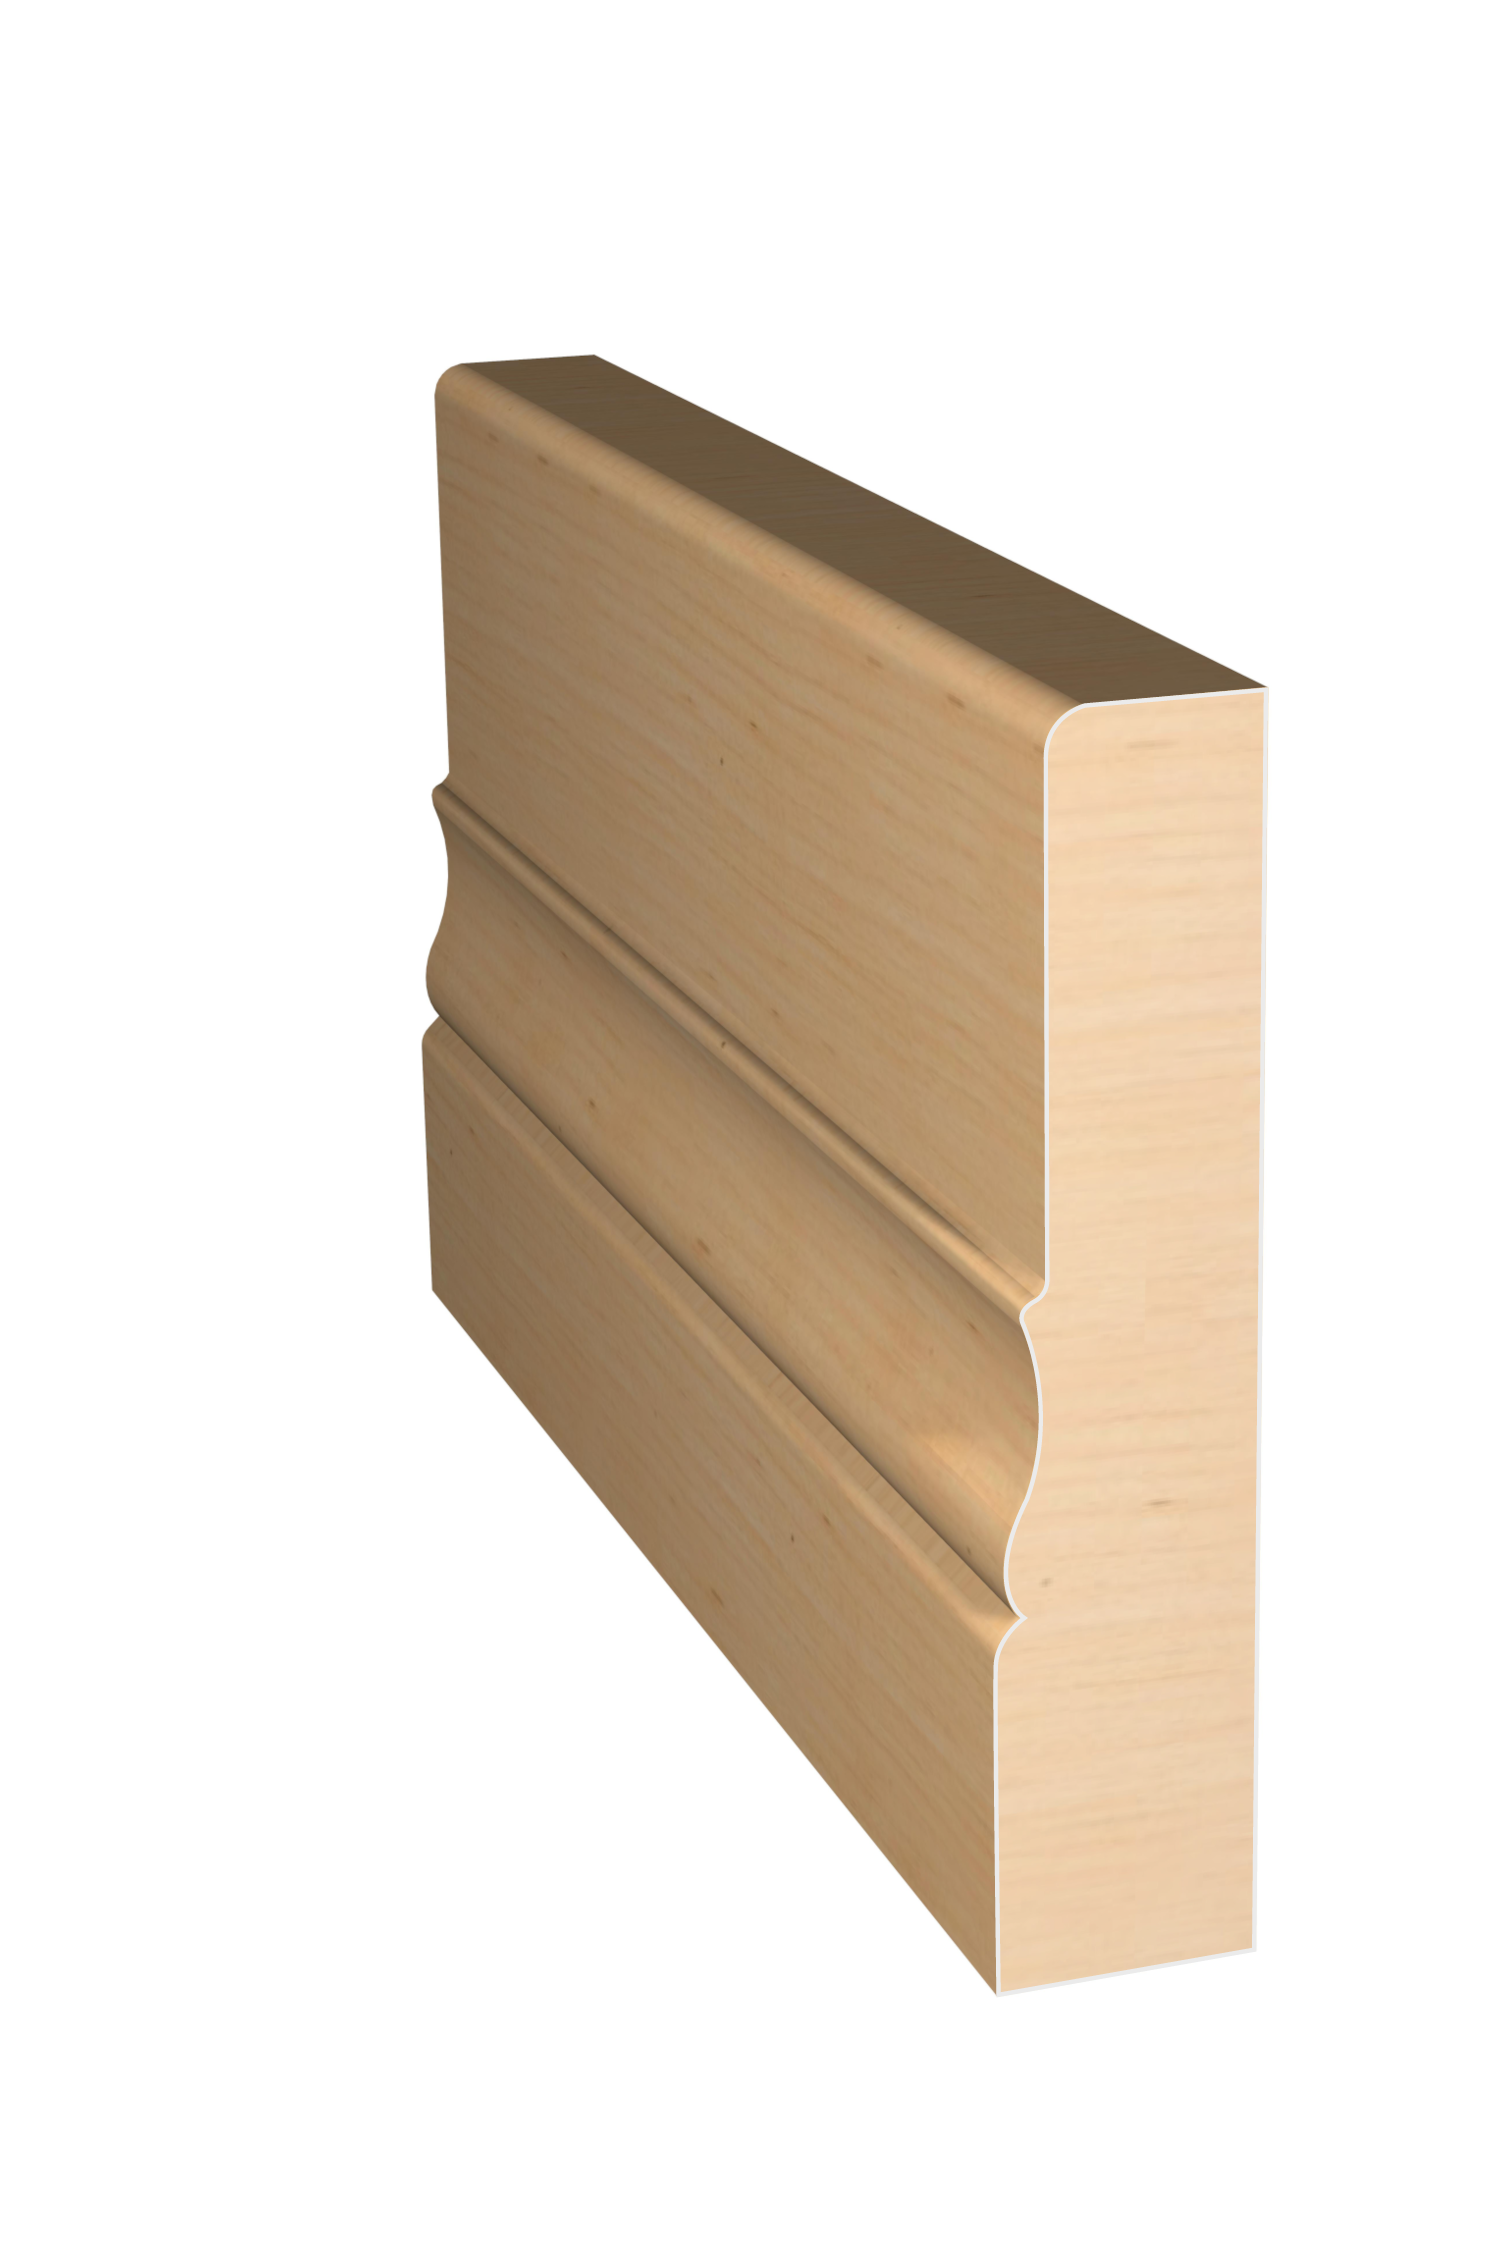 Three dimensional rendering of custom casing wood molding CAPL31212 made by Public Lumber Company in Detroit.